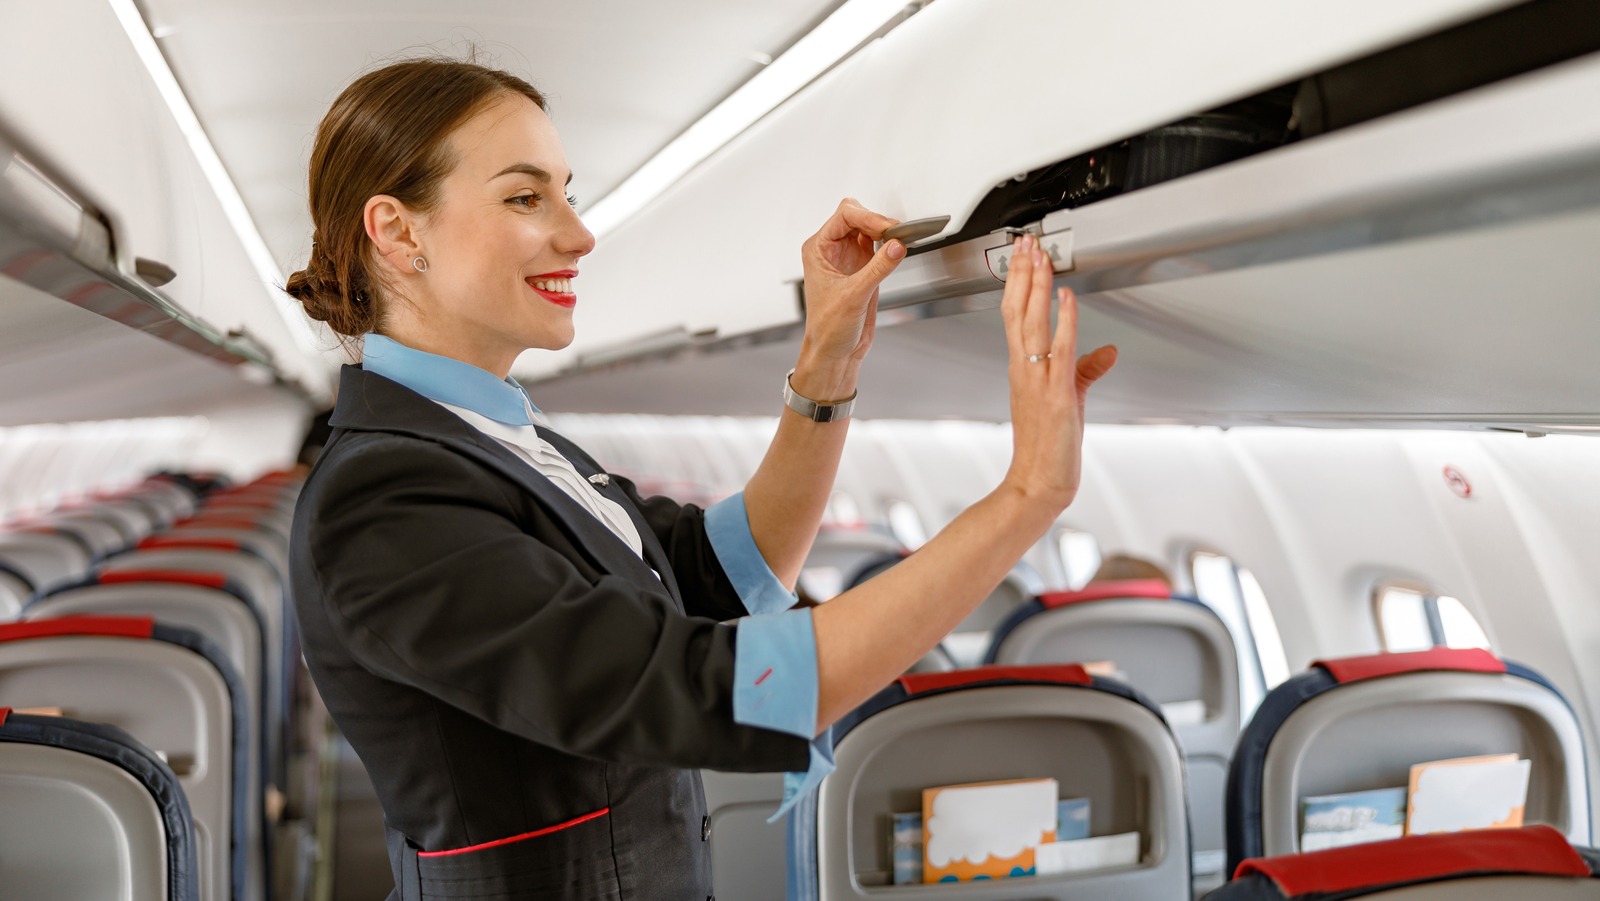 Here's How To Start A Career As A Flight Attendant